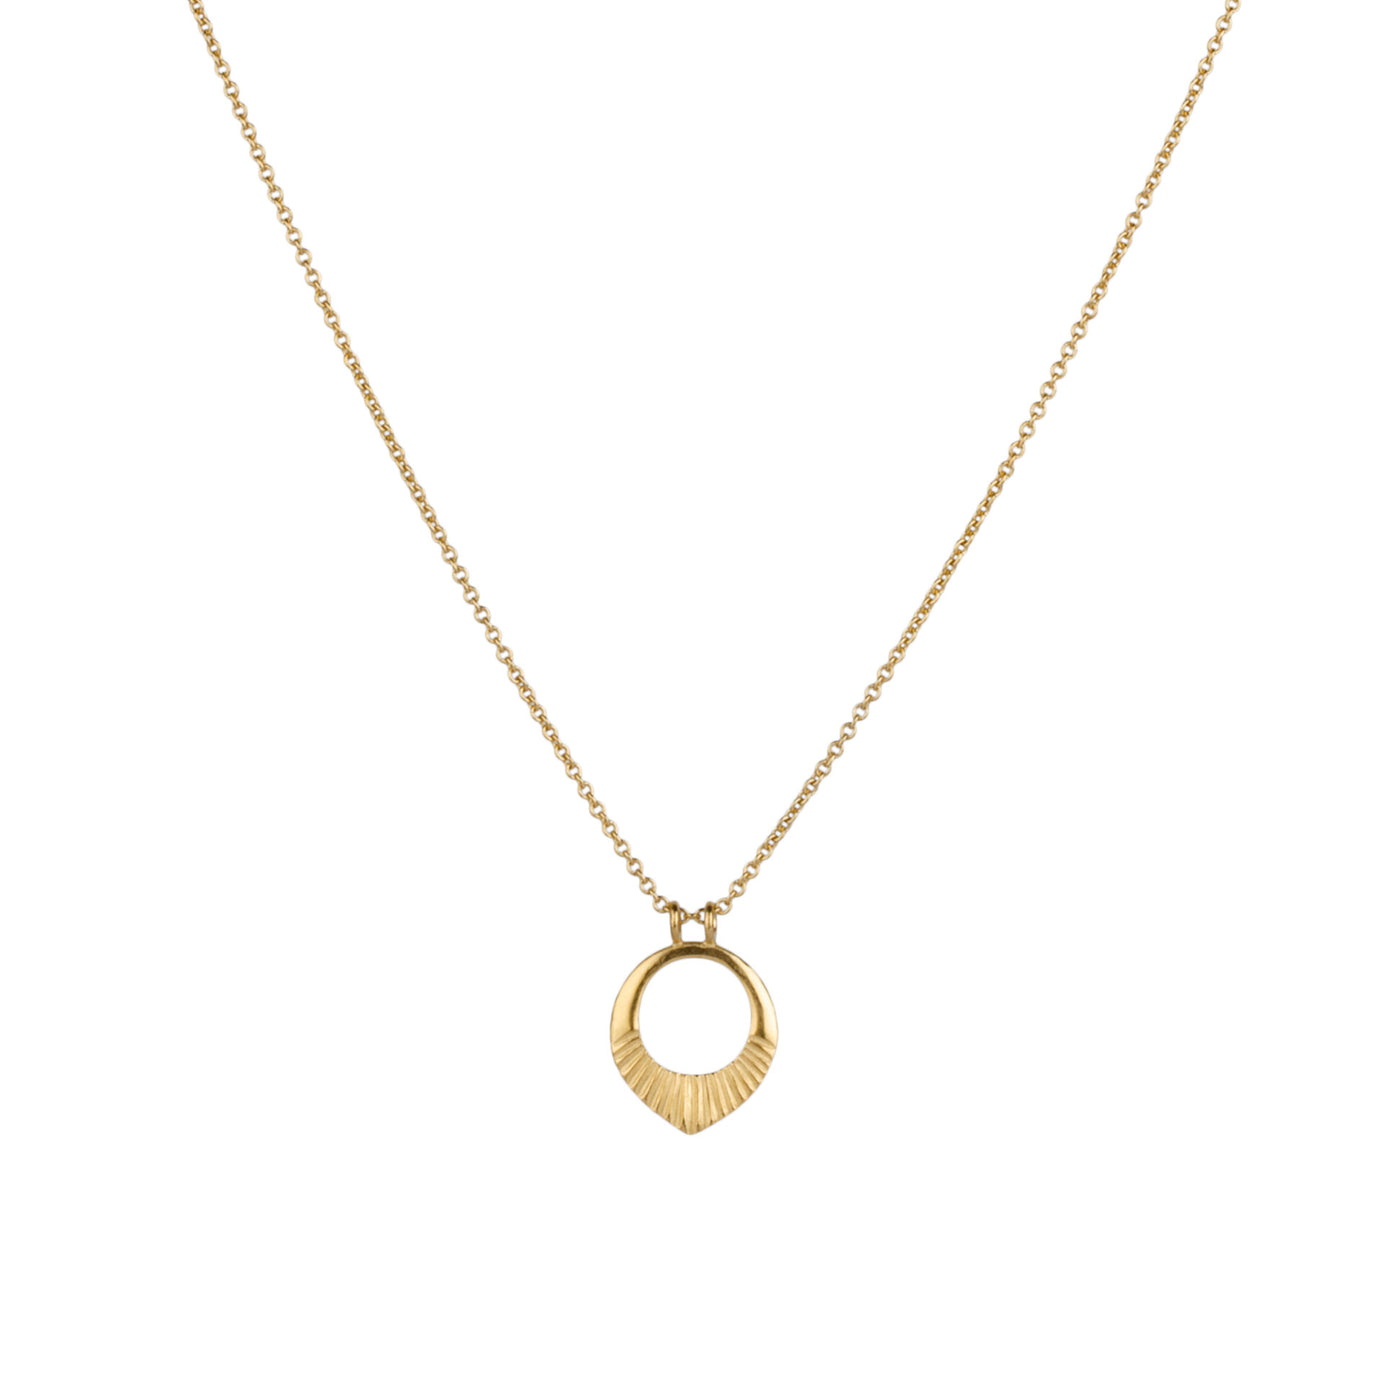 Small vermeil open petal shape necklace with carved rays across the bottom on a white background